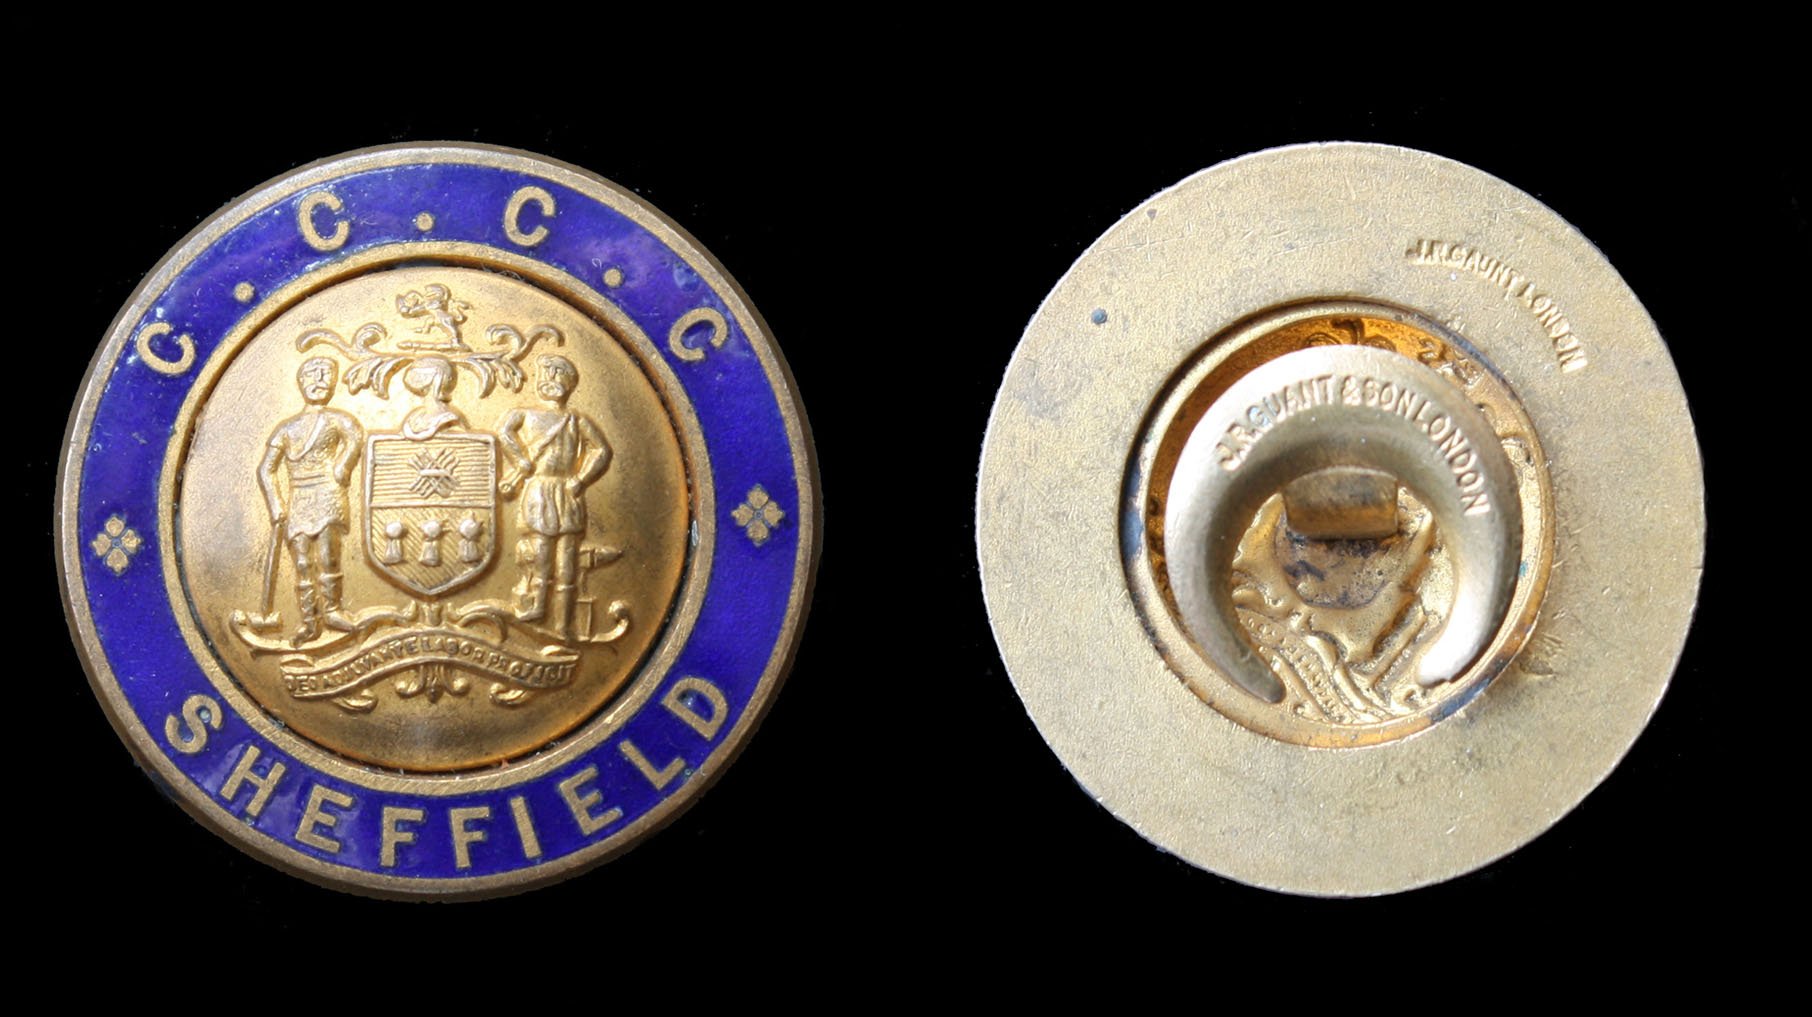 Sheffield Chief Constable’s Civilian Corps Badge 1914 to 1915.